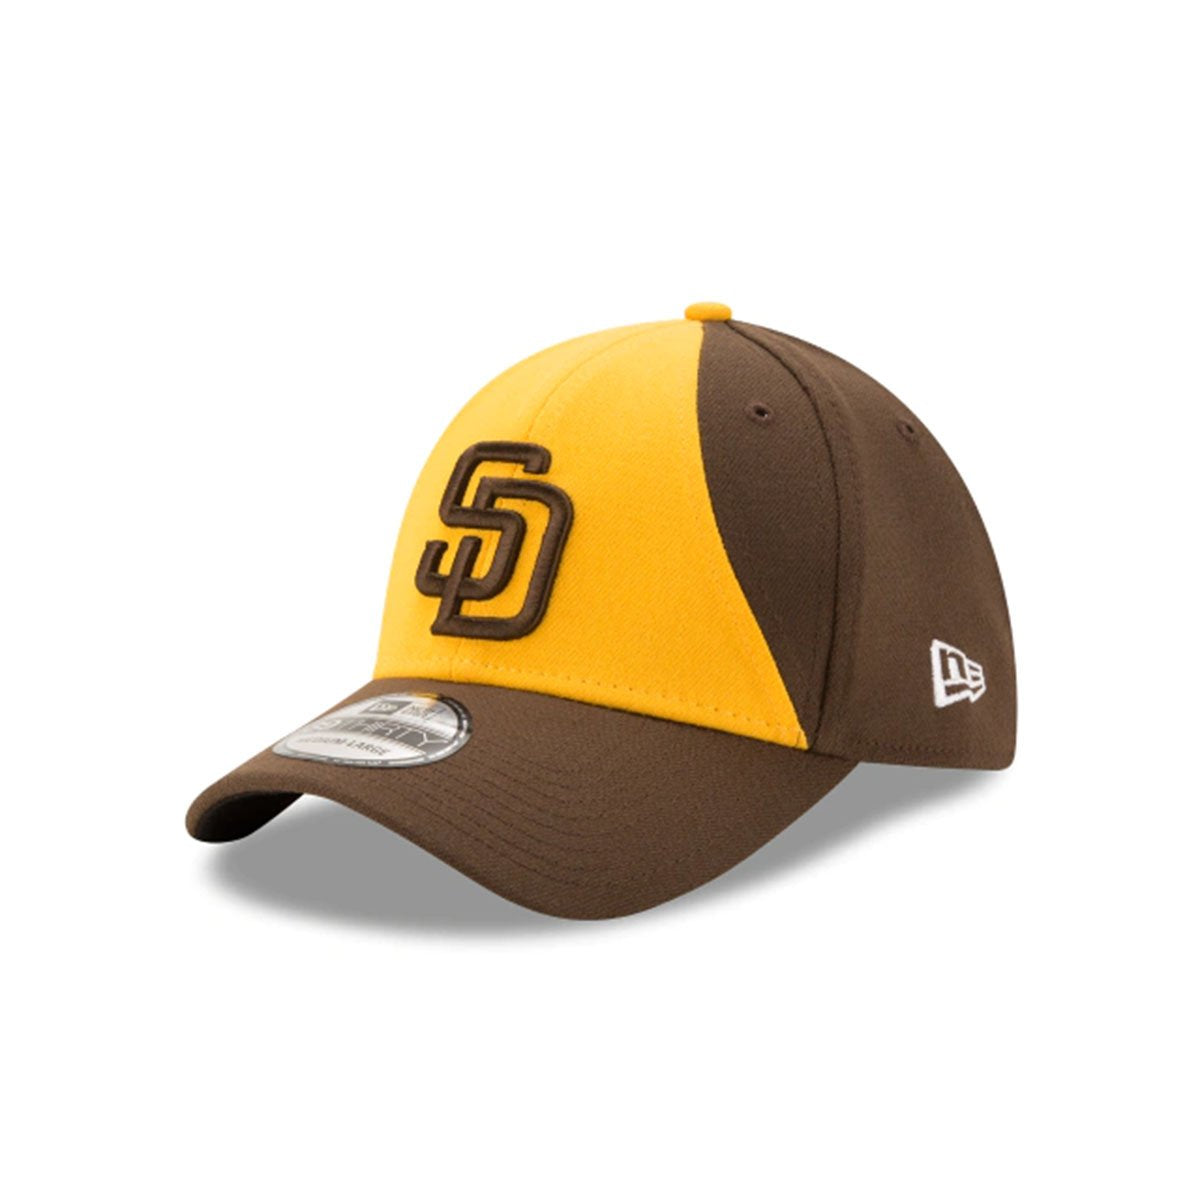 SAN DIEGO PADRES 39THIRTY STRETCH BROWN/YELLOW